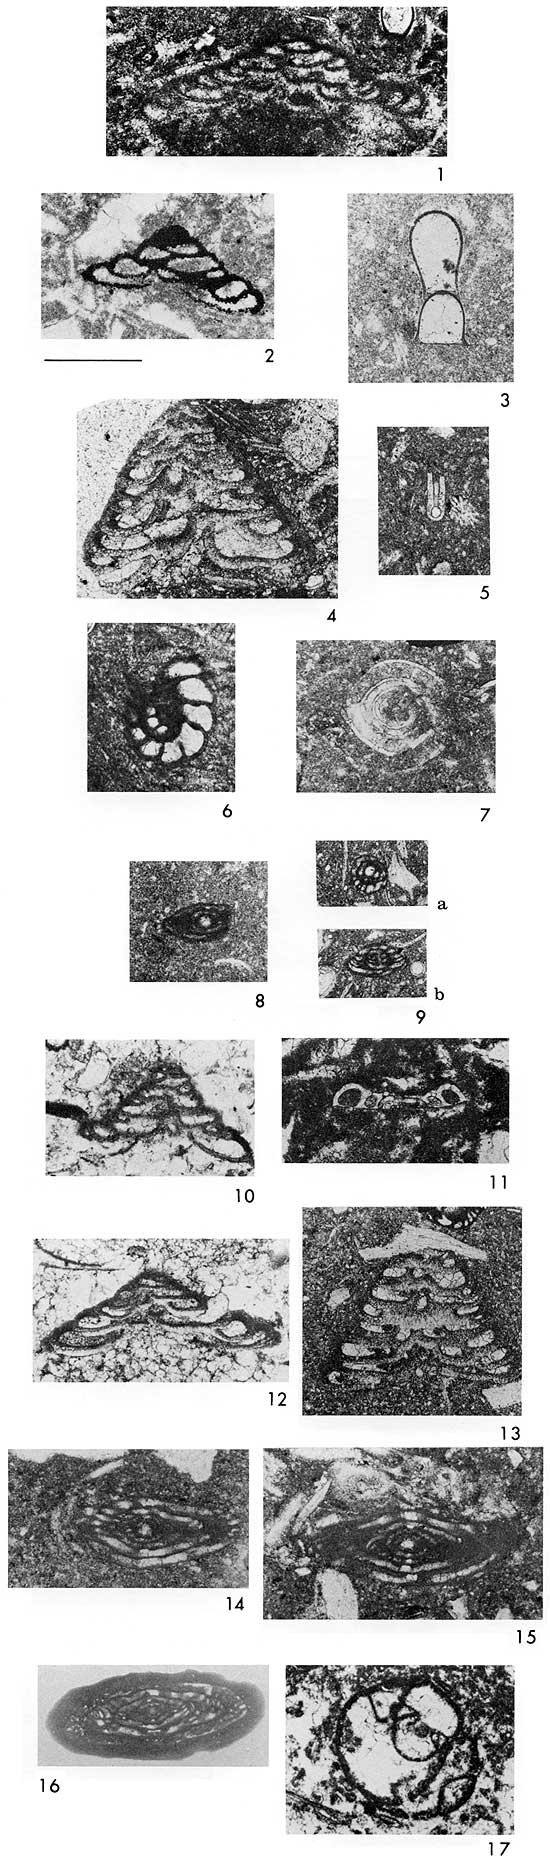 Black and white photos of microfossils in thin sections.